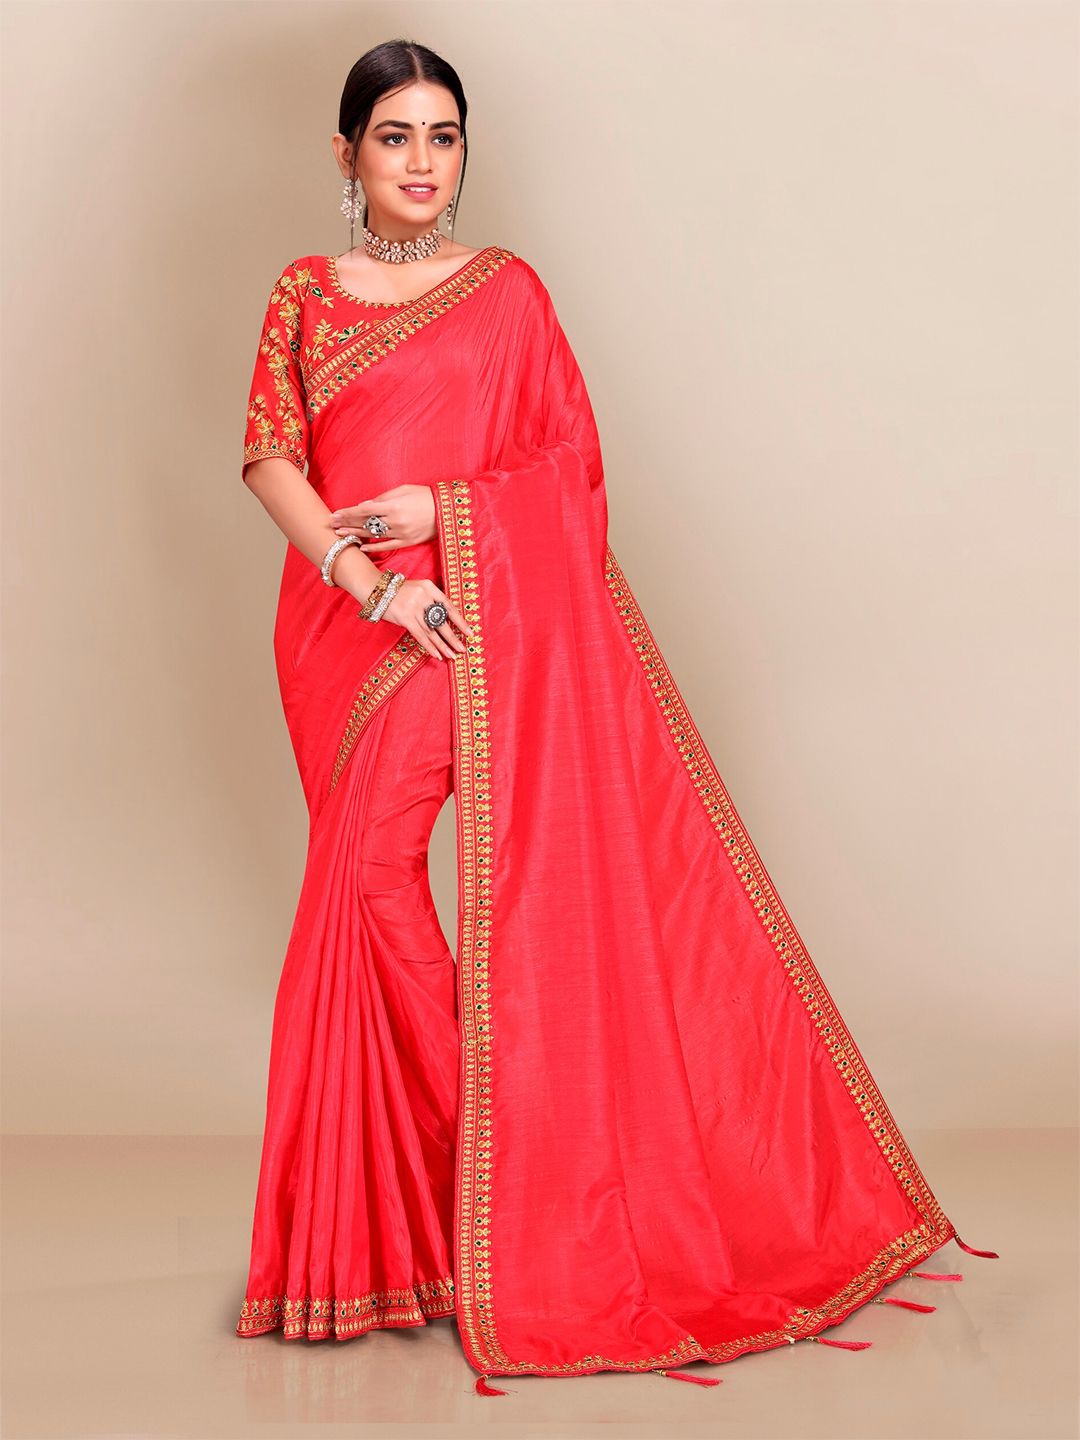 VAIRAGEE Pink & Gold-Toned Embroidered Designer Saree Price in India